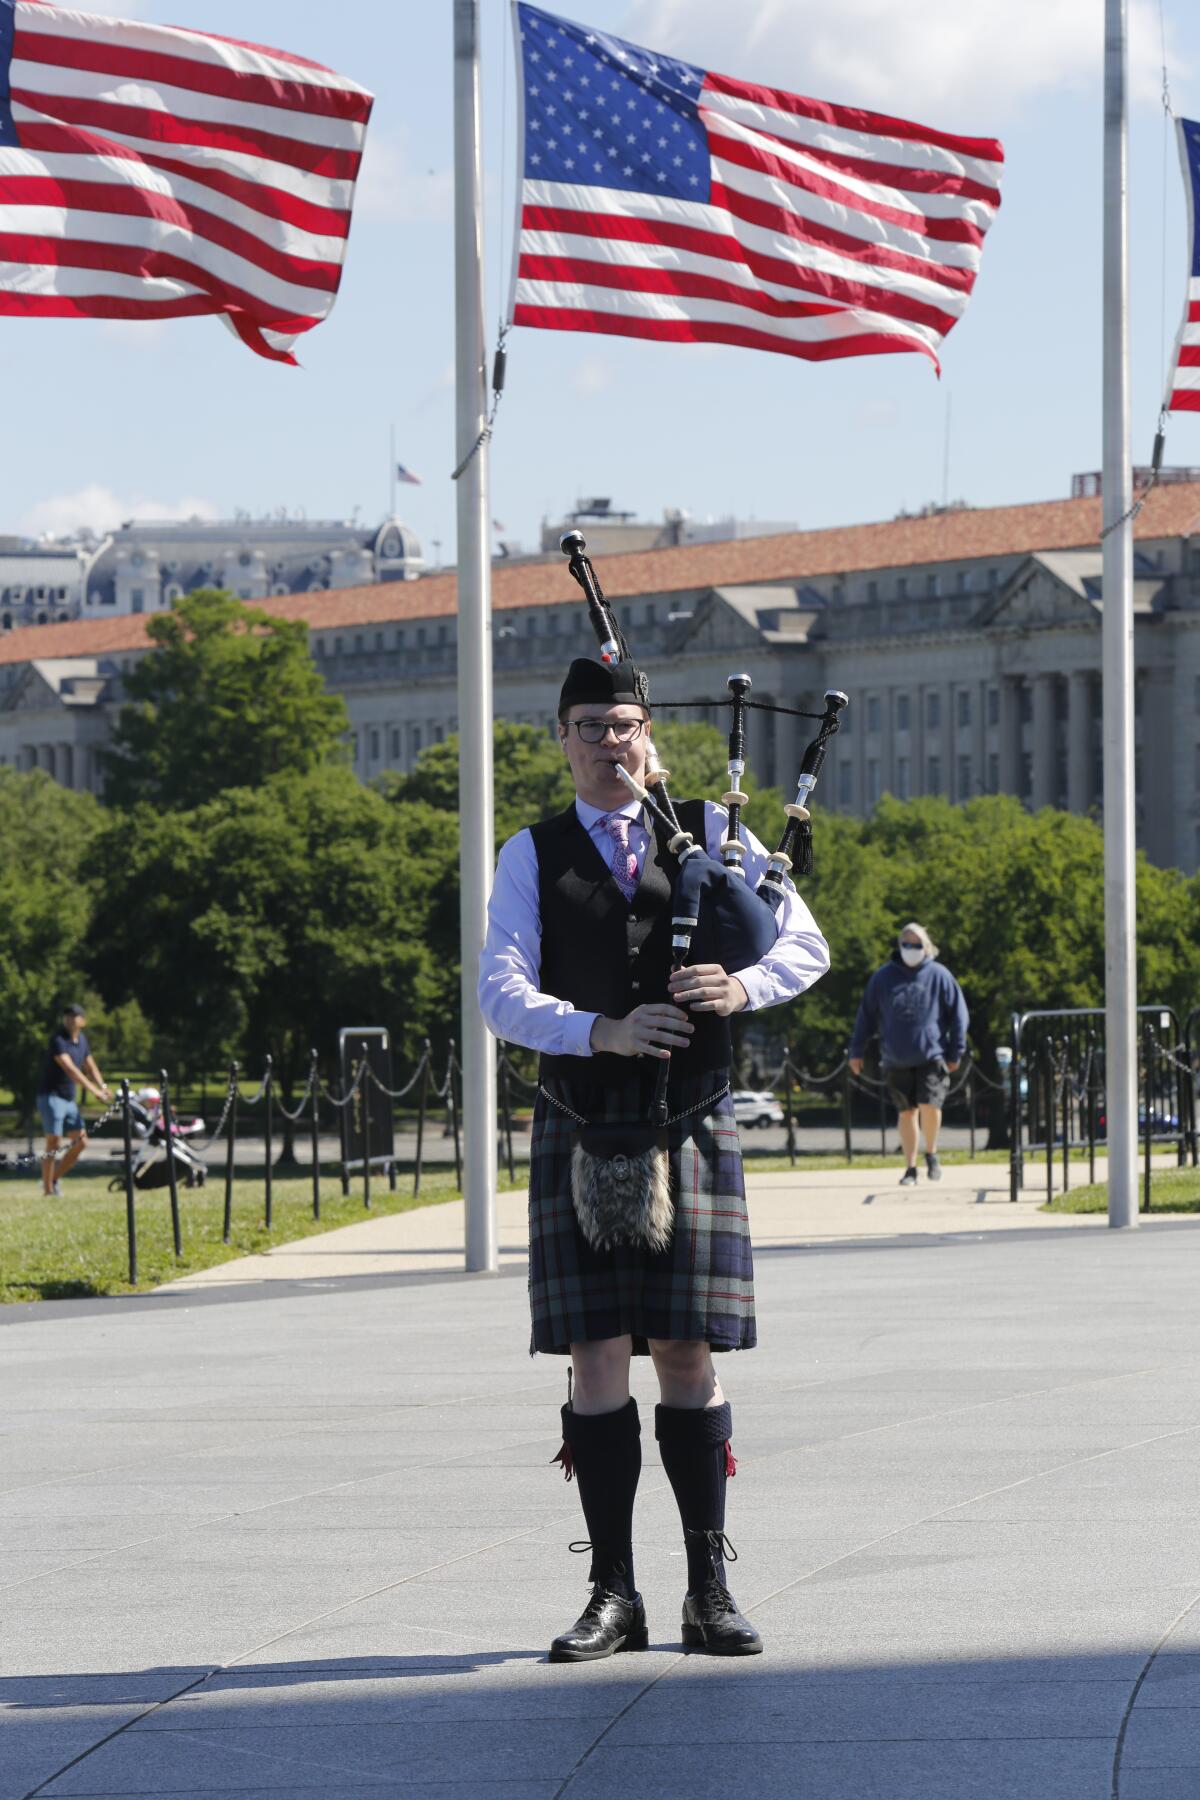 Bagpiper playing at the opening ceremony at the base of the Washington Monument.